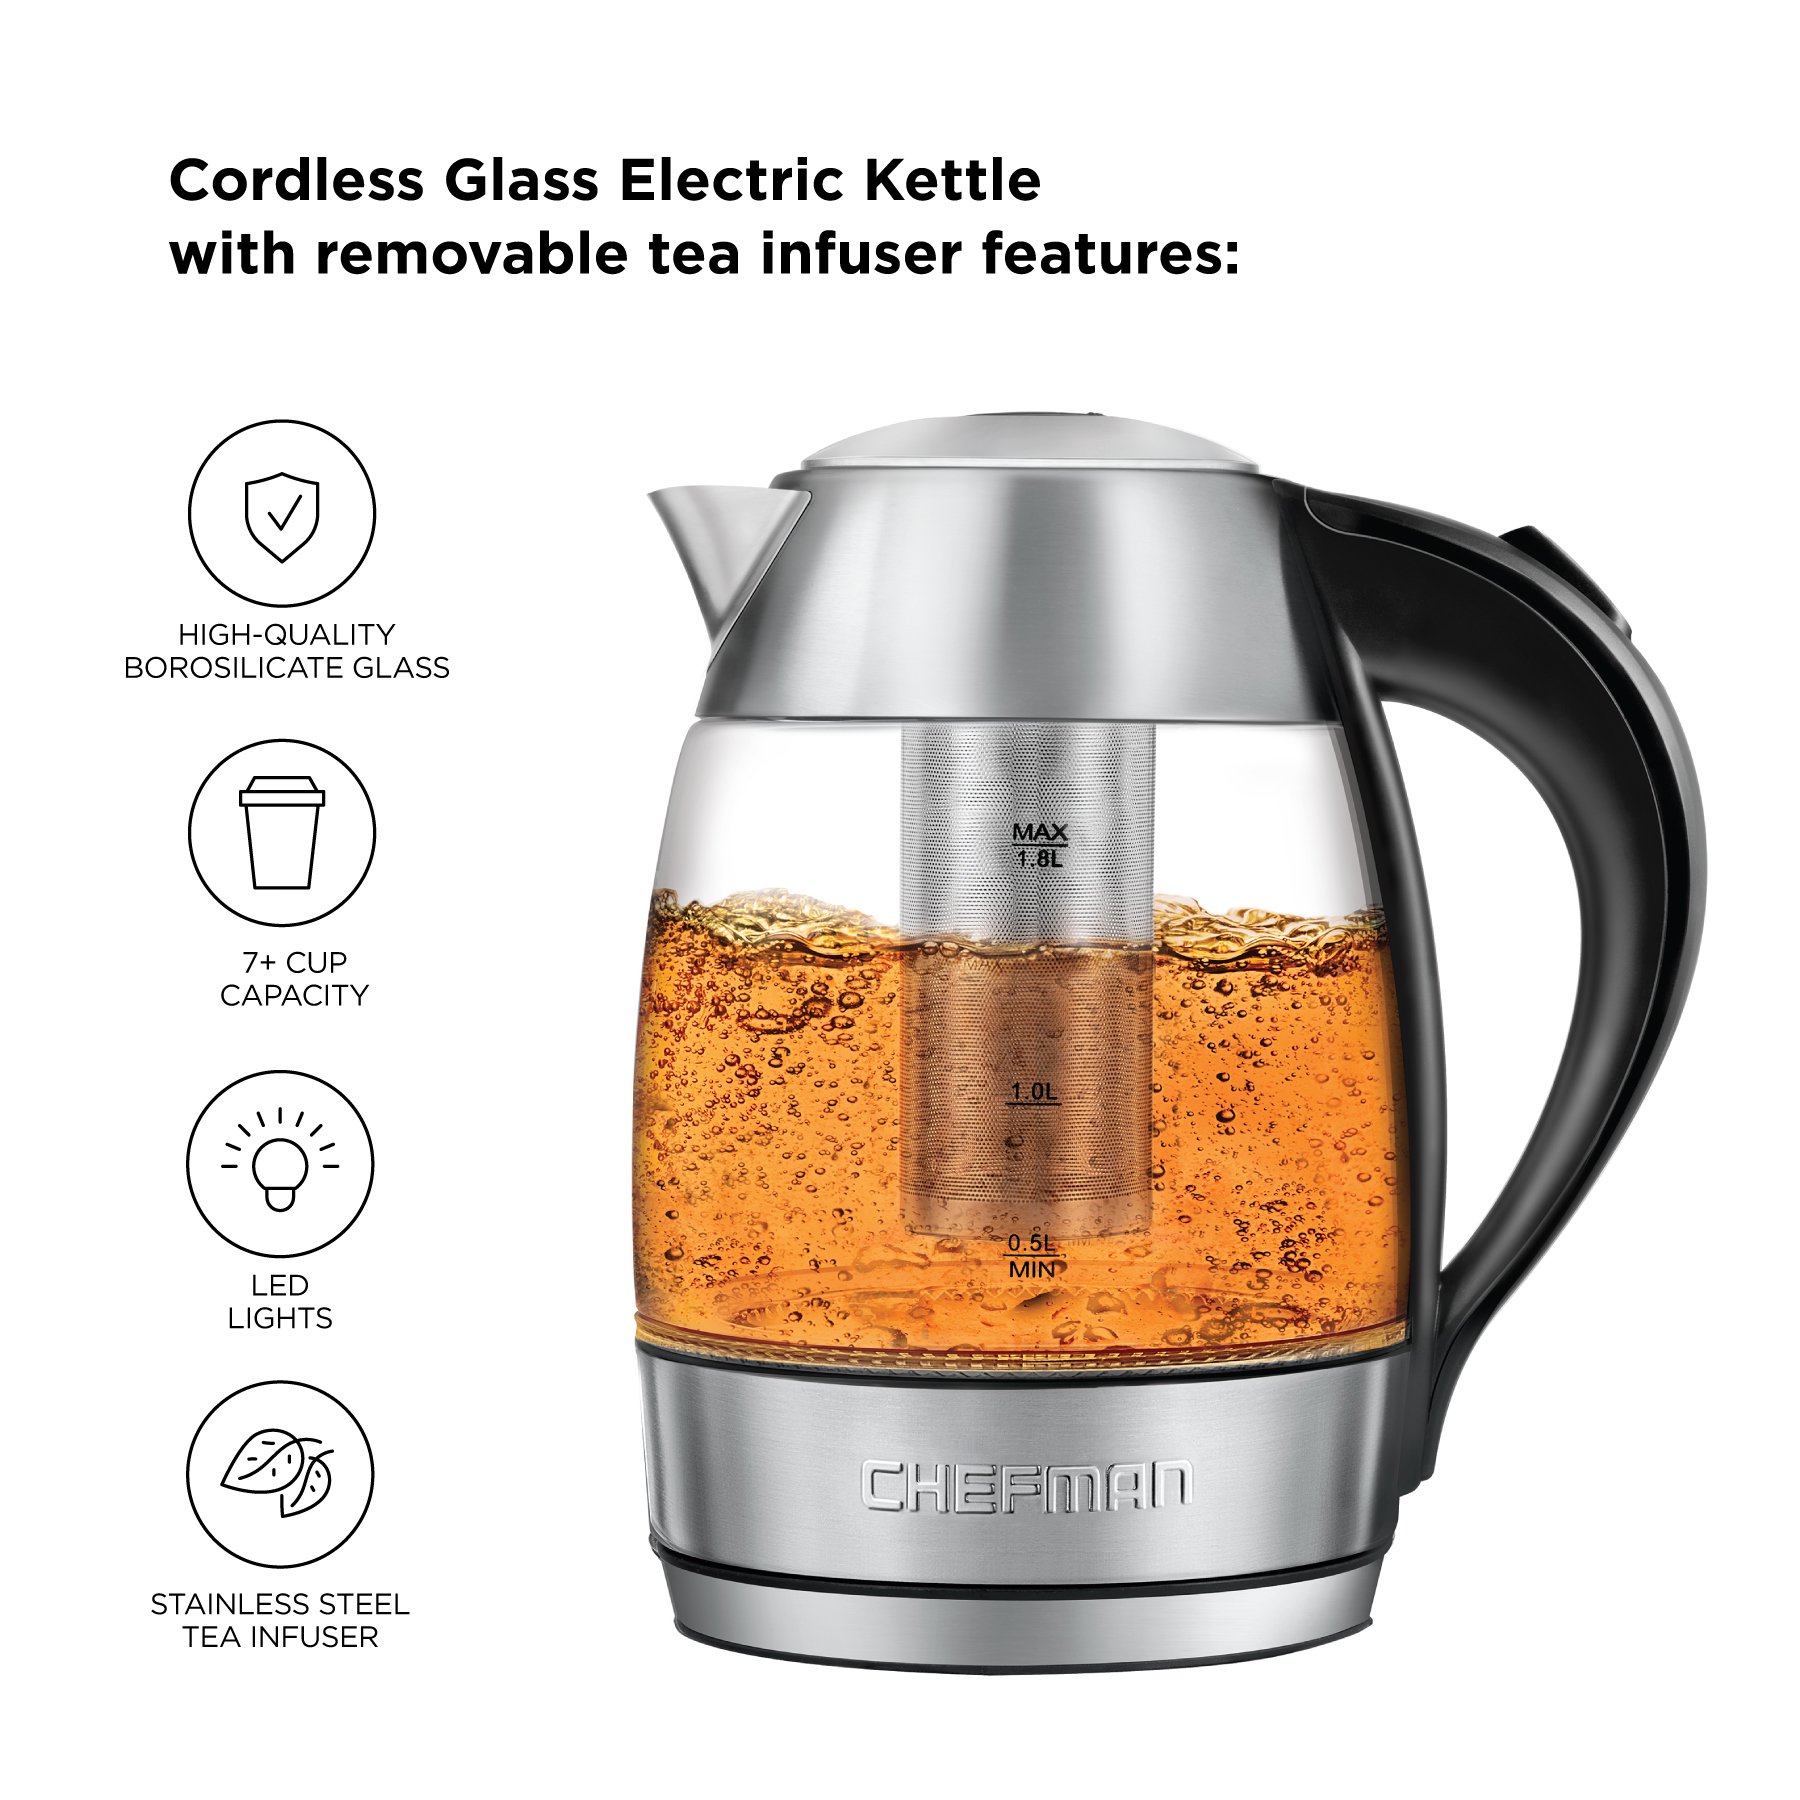 https://themarketdepot.com/wp-content/uploads/2023/01/Chefman-Electric-Glass-Kettle-W-Removable-Tea-Infuser-1.8-Liters-Stainless-Steel-4.jpeg